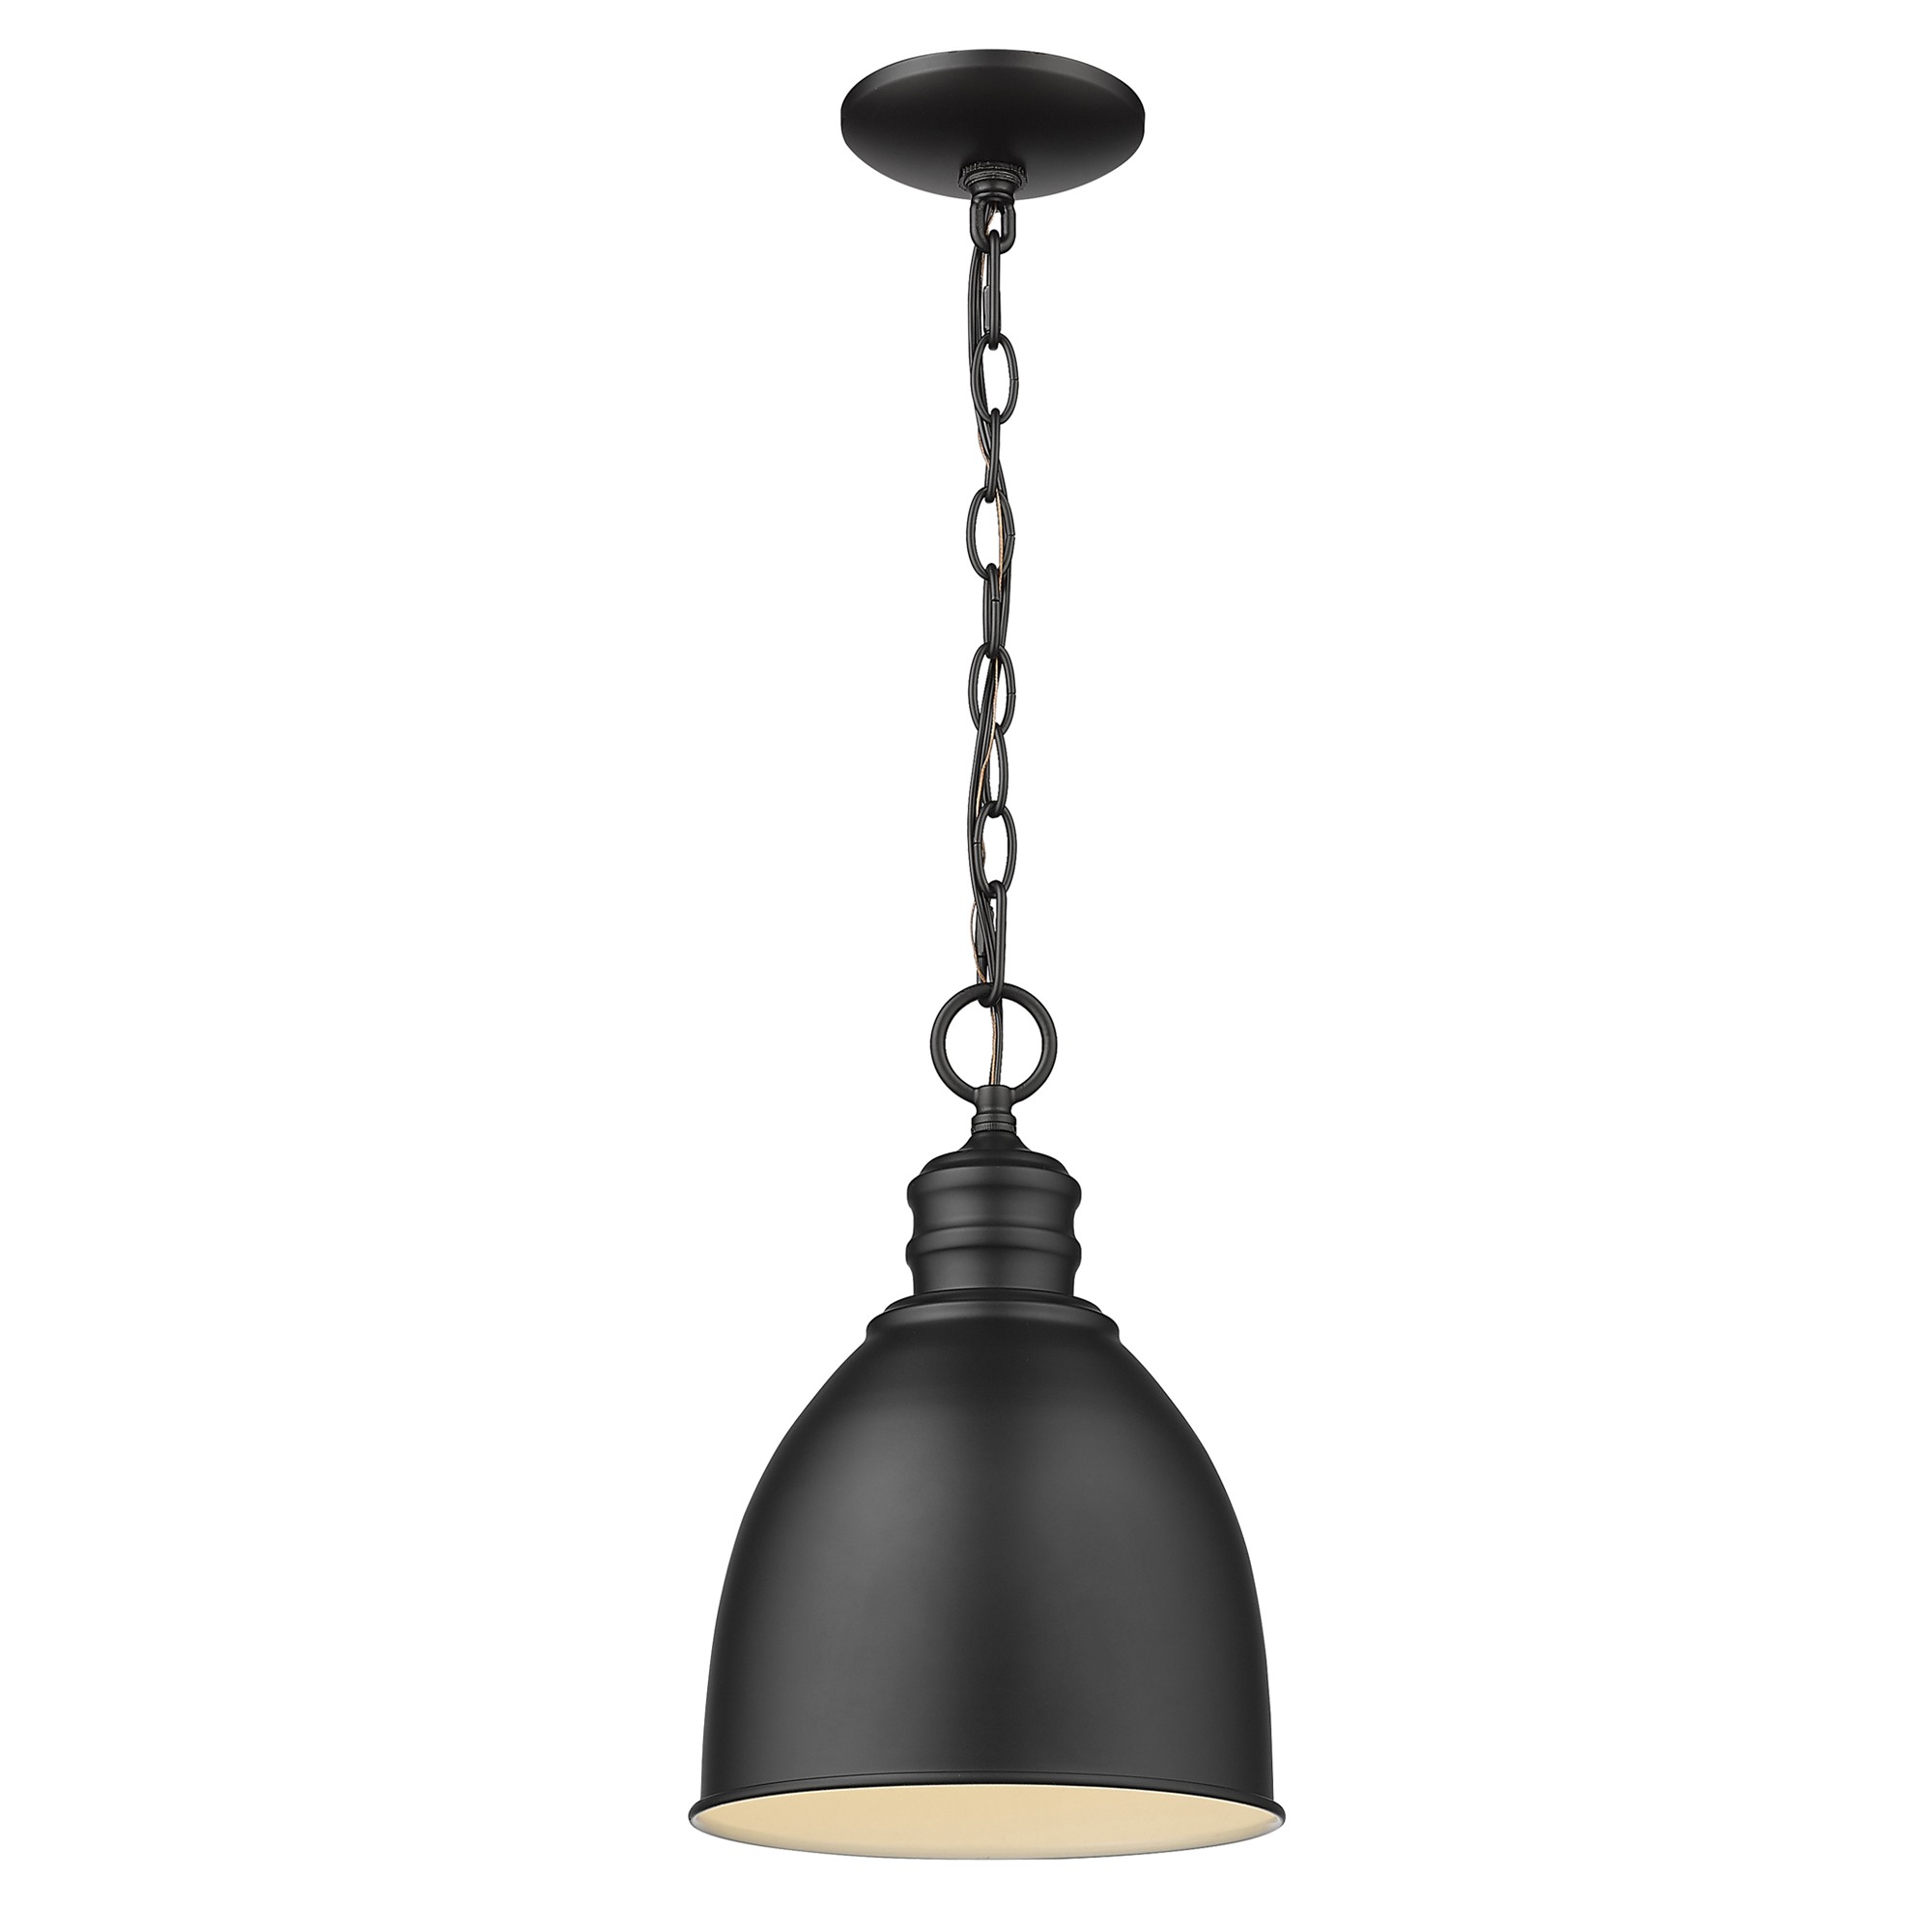 Acclaim Lighting IN11171BK 13.25 in. Colby 1-Light Matte Black Pendant with Gloss White Interior Shade - image 2 of 3